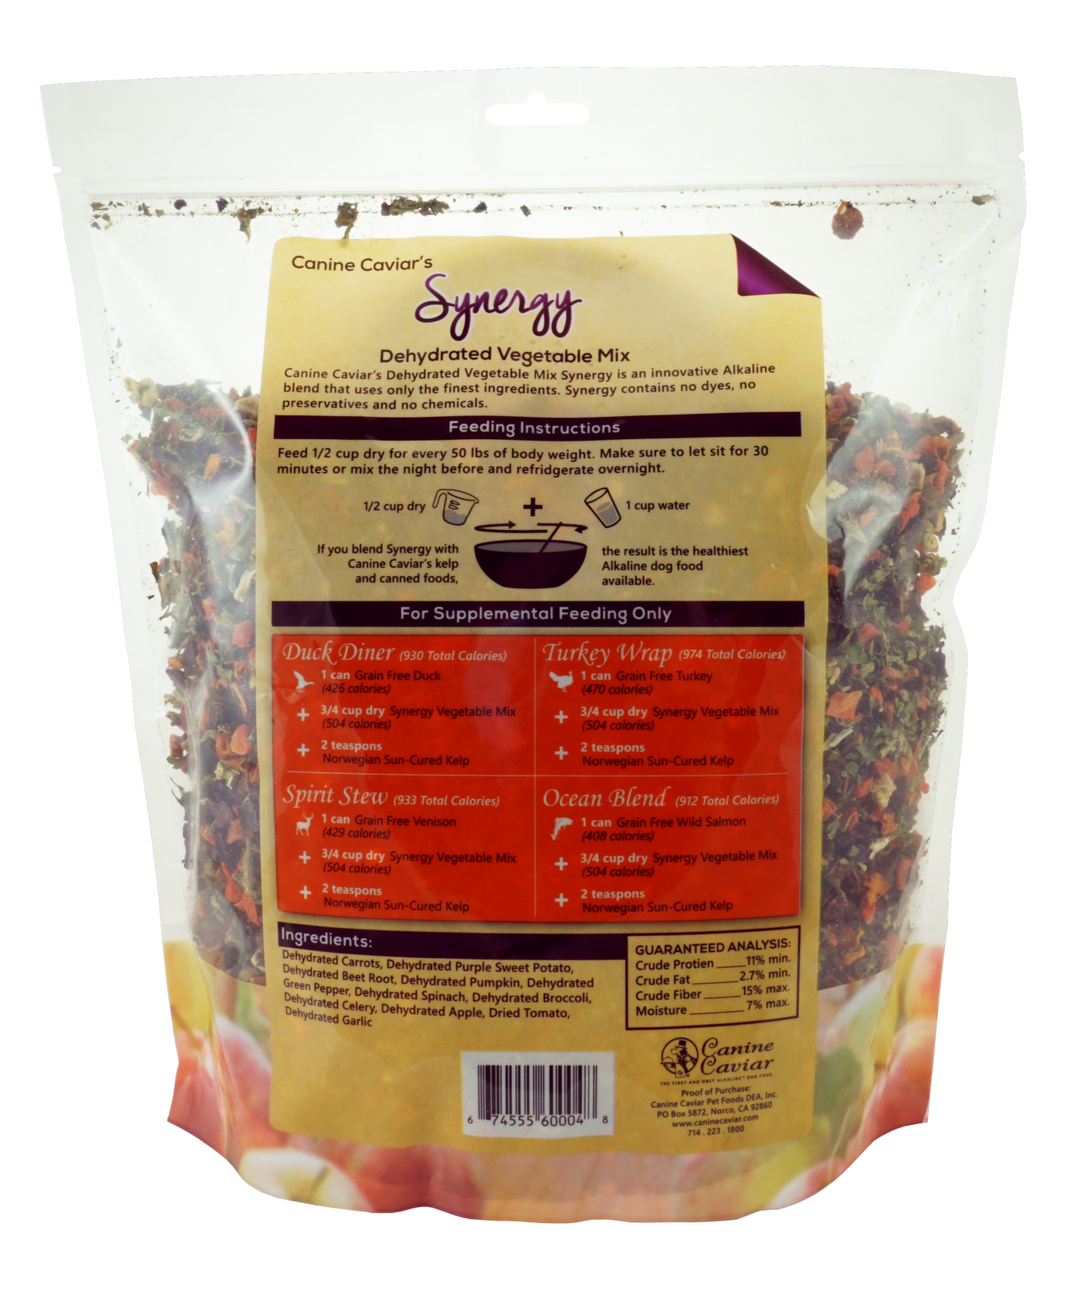 Canine Caviar - Synergy Dehydrated Vegetable Mix Food Supplement